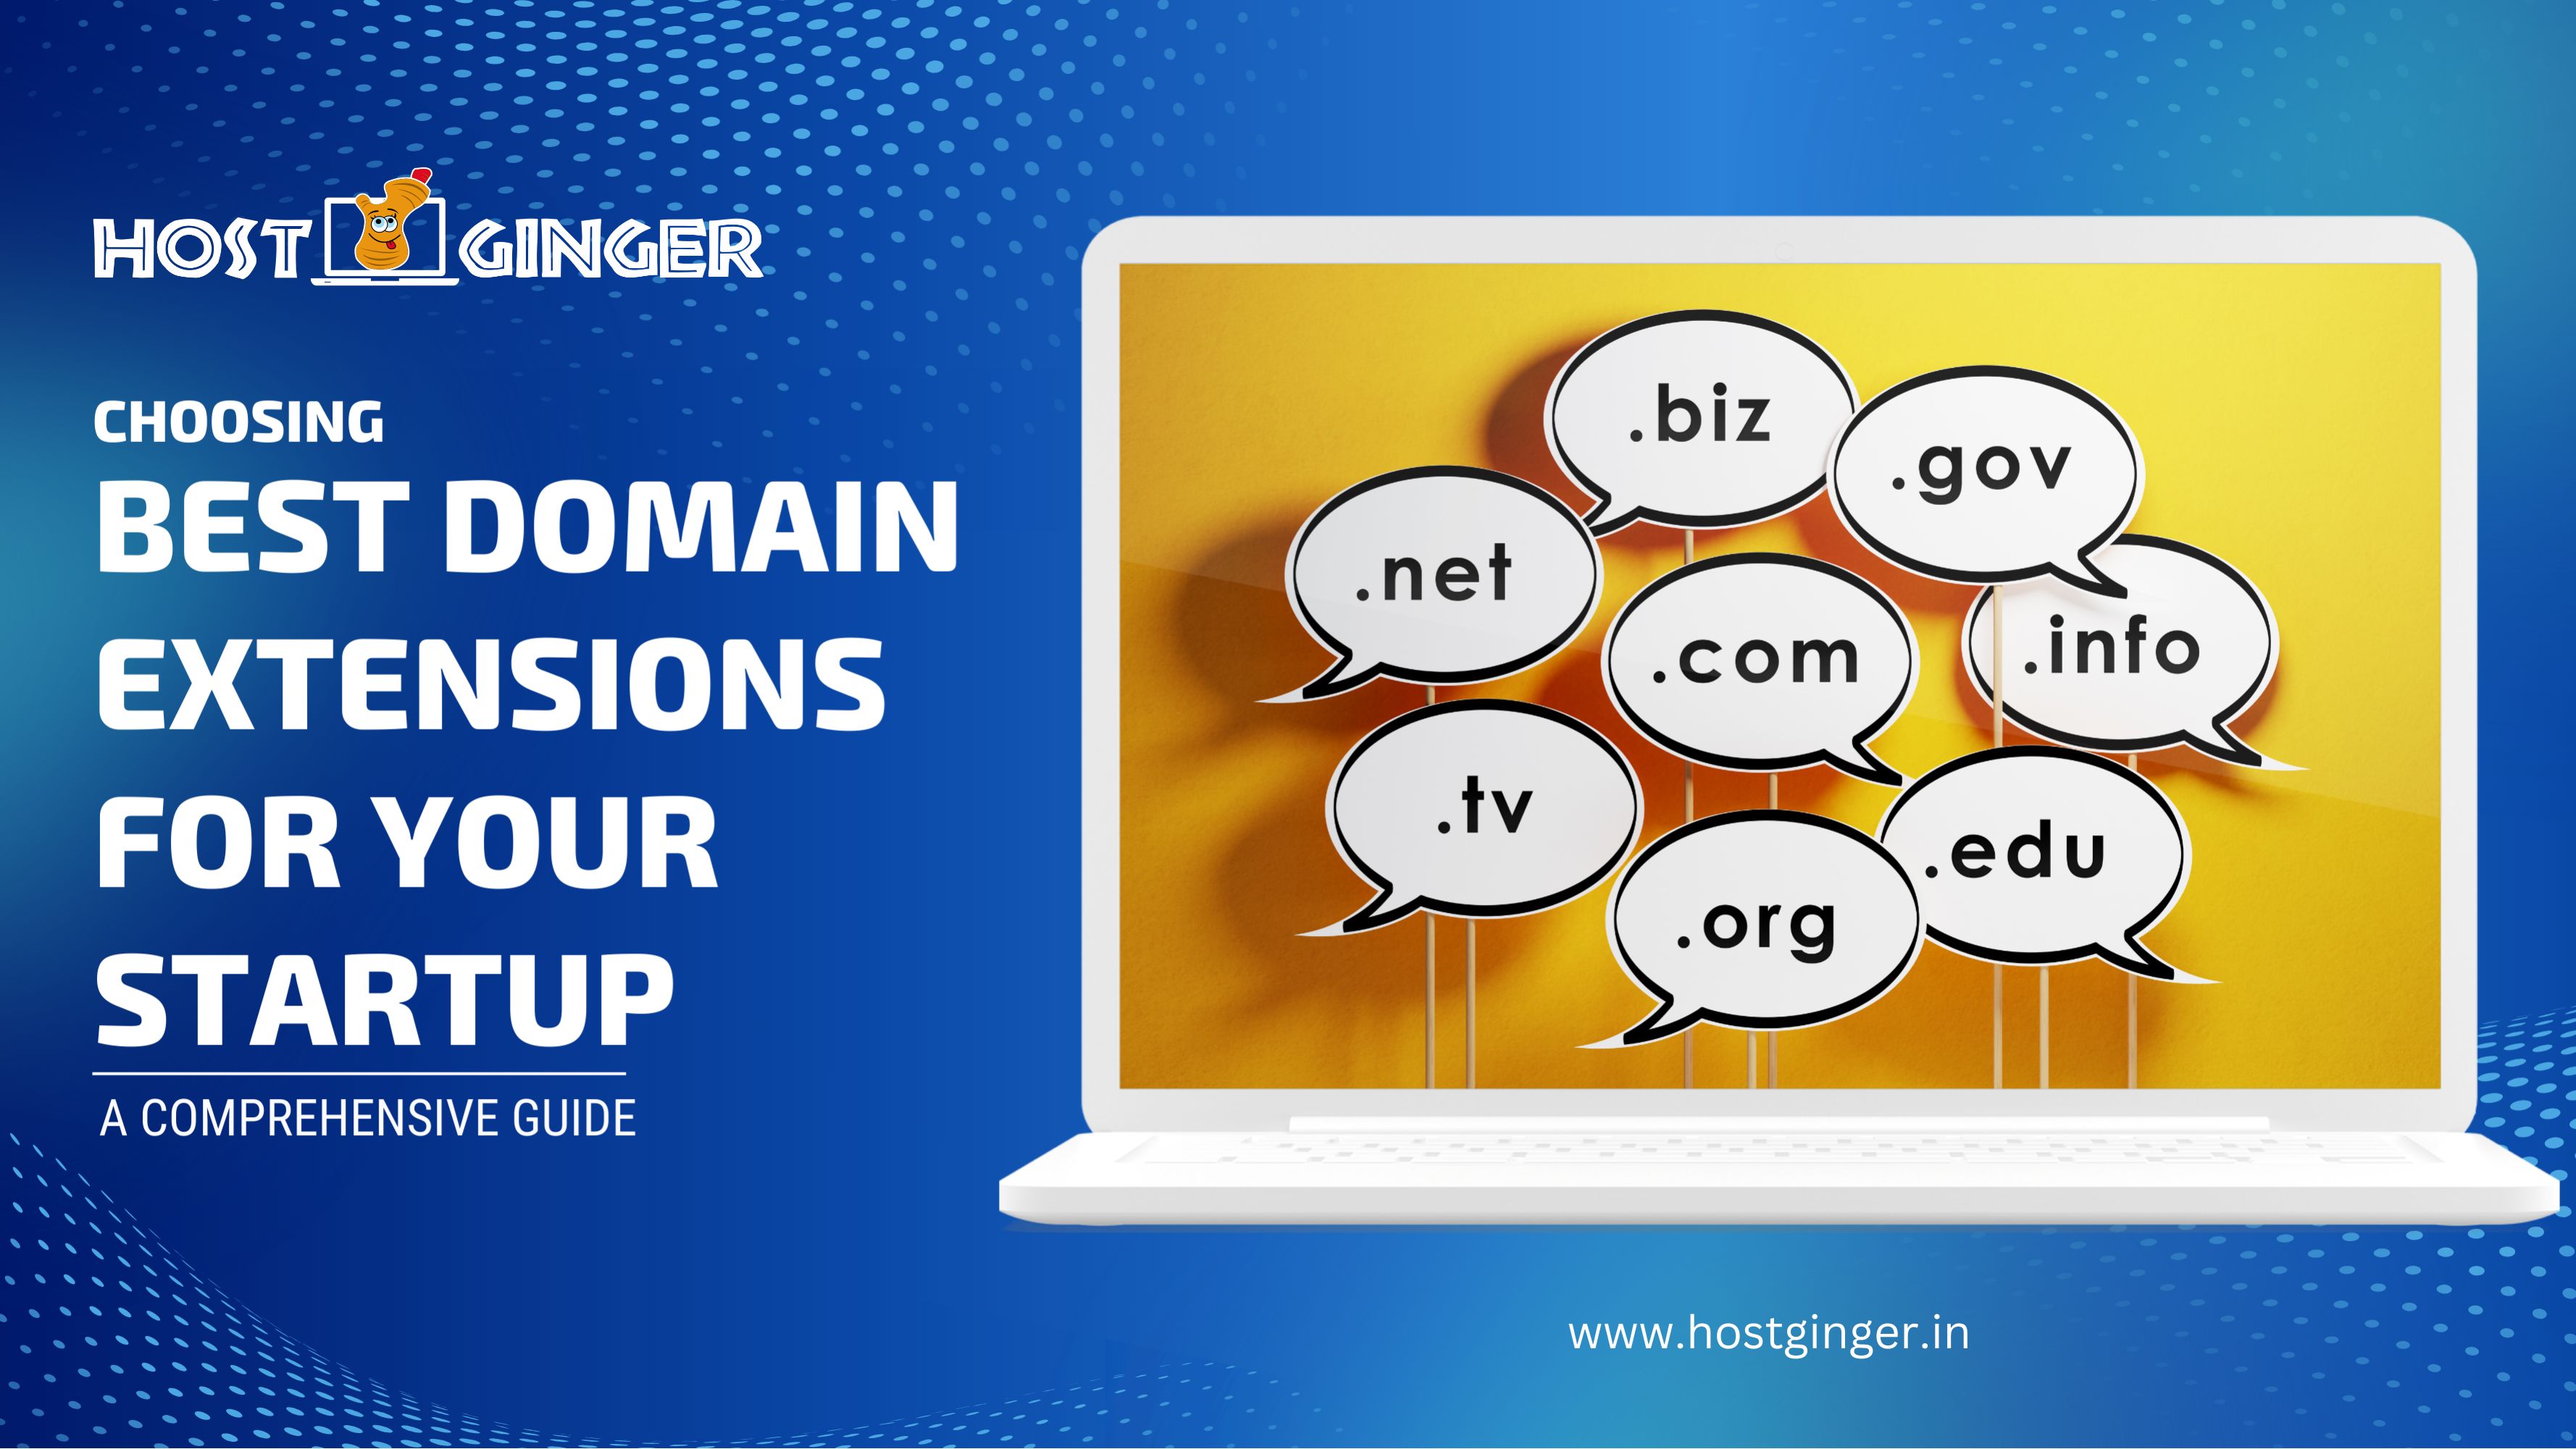 Choosing the Best Domain Extensions for Your Startup